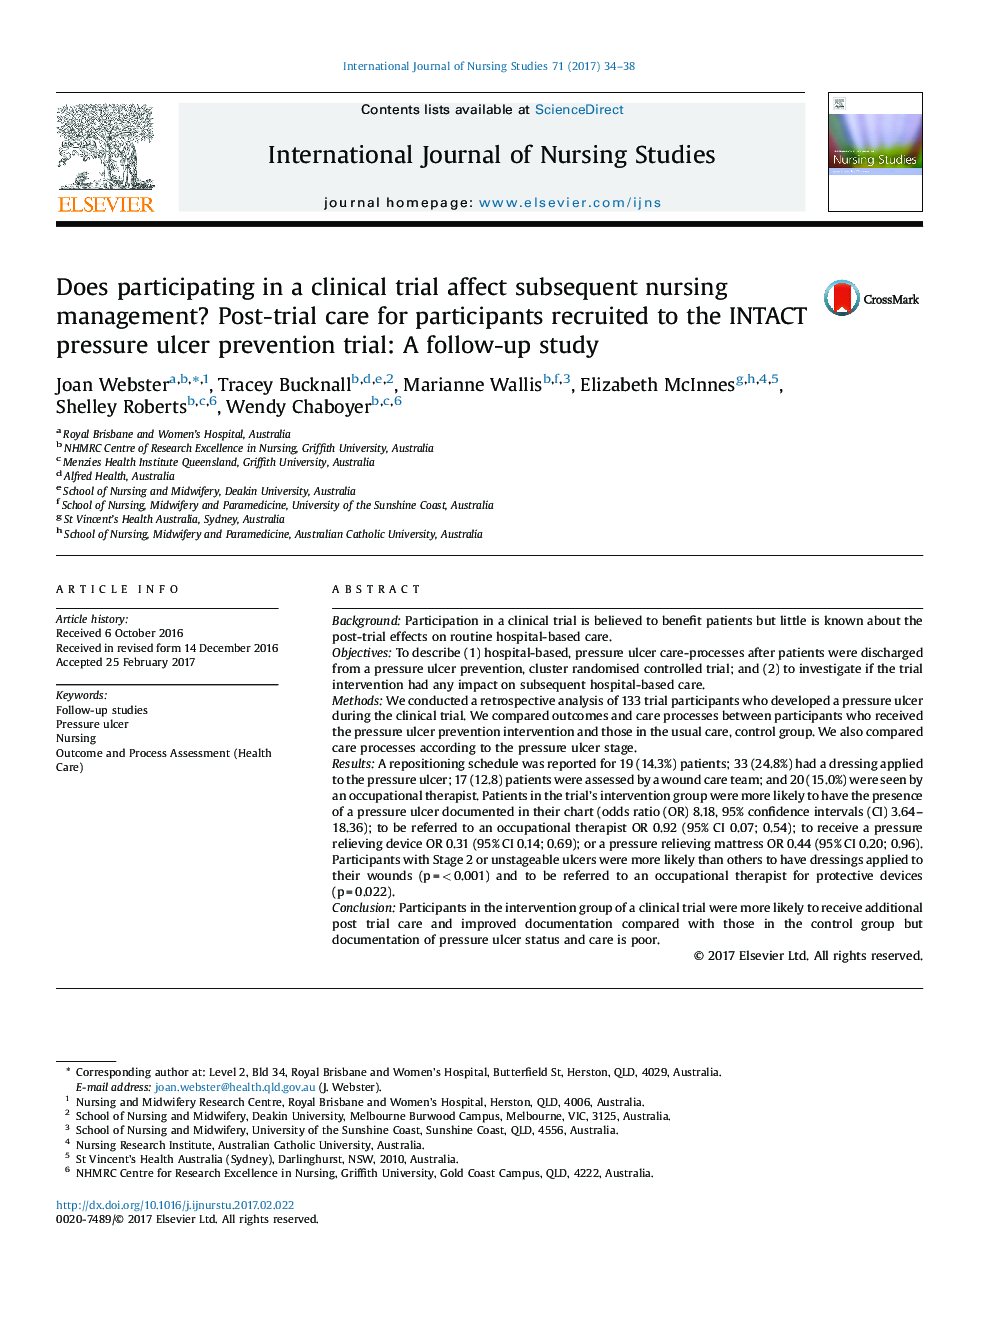 Does participating in a clinical trial affect subsequent nursing management? Post-trial care for participants recruited to the INTACT pressure ulcer prevention trial: A follow-up study